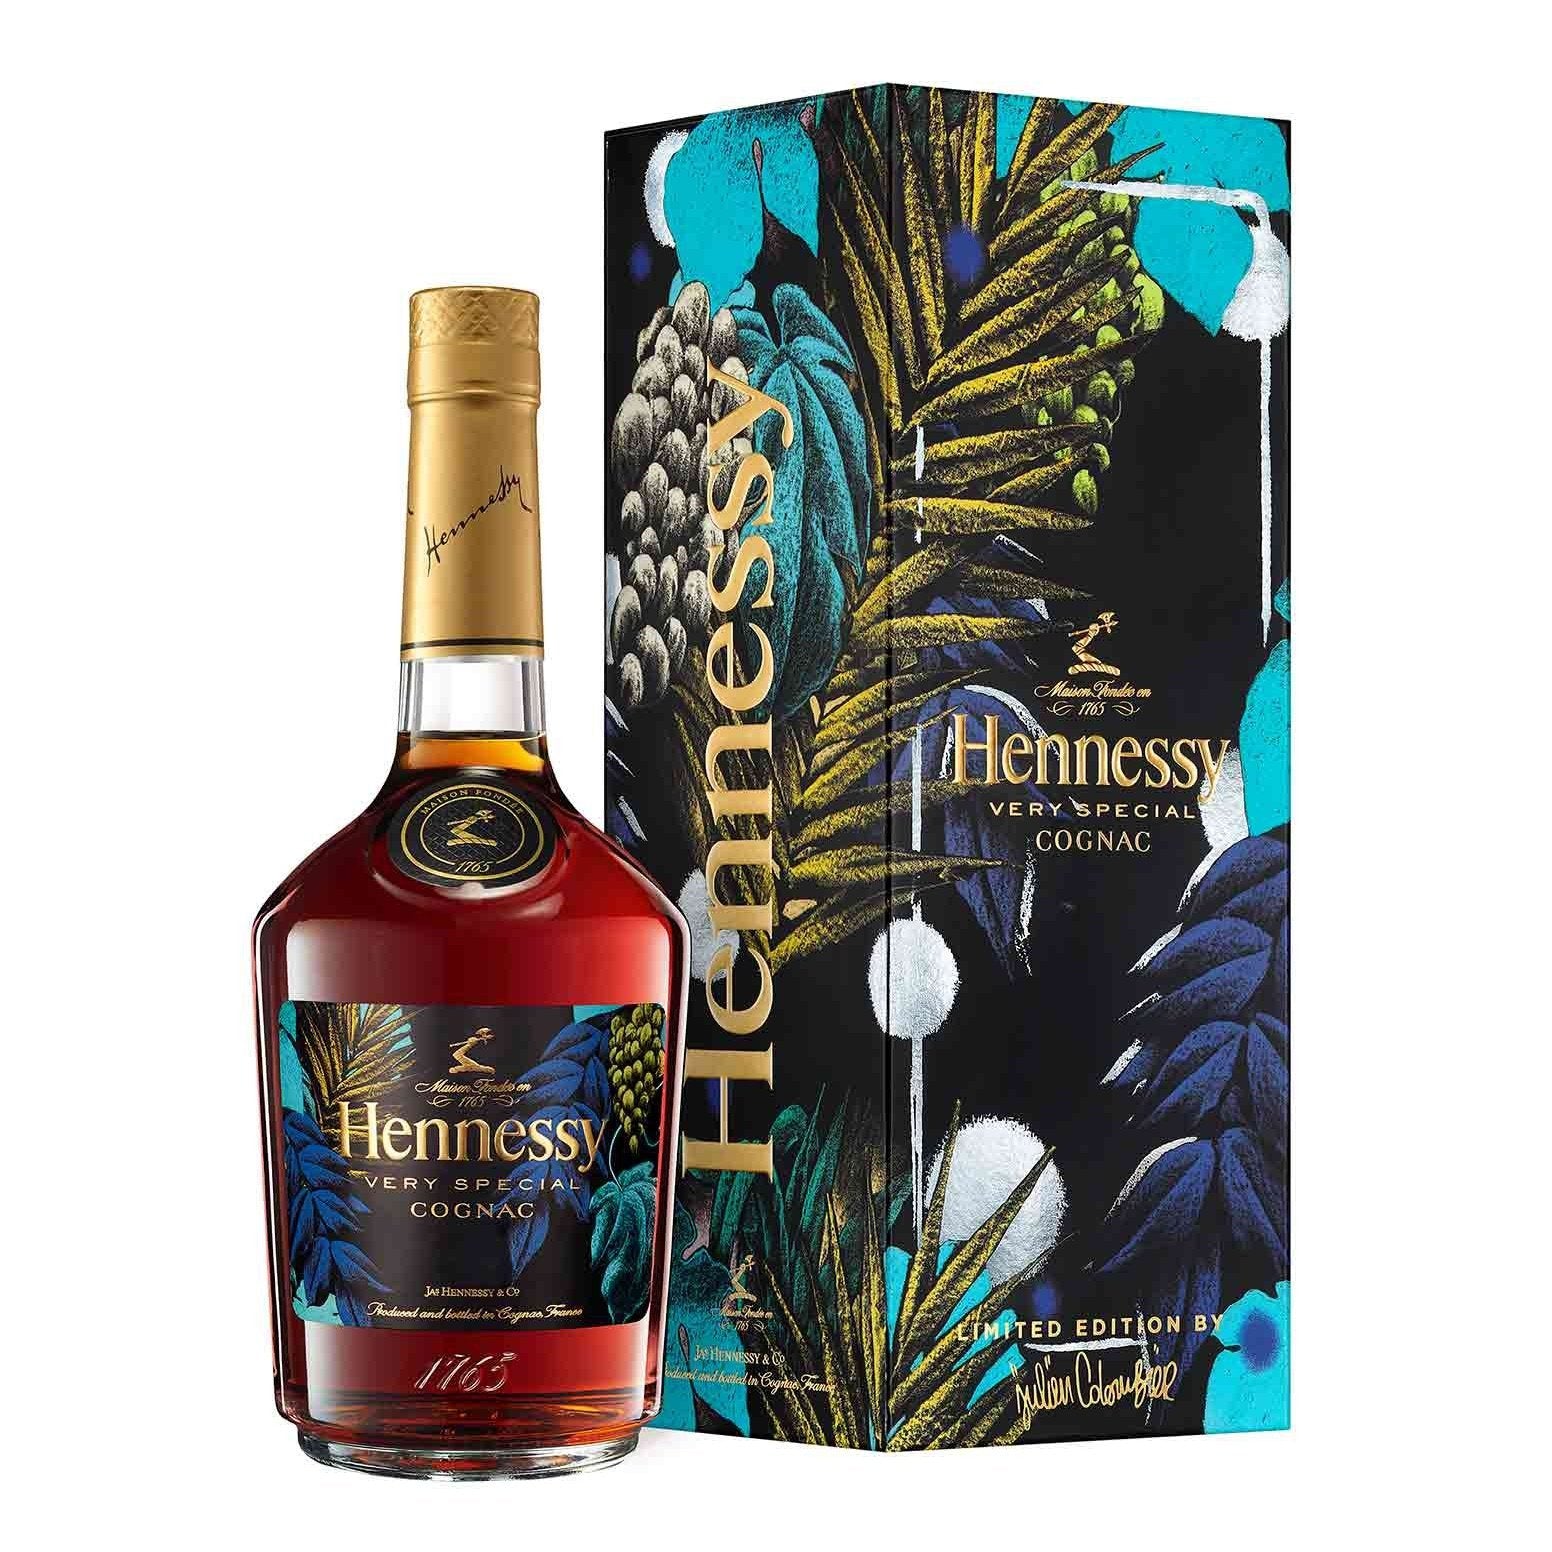 How Maison Hennessy Became the World's Most Popular Cognac